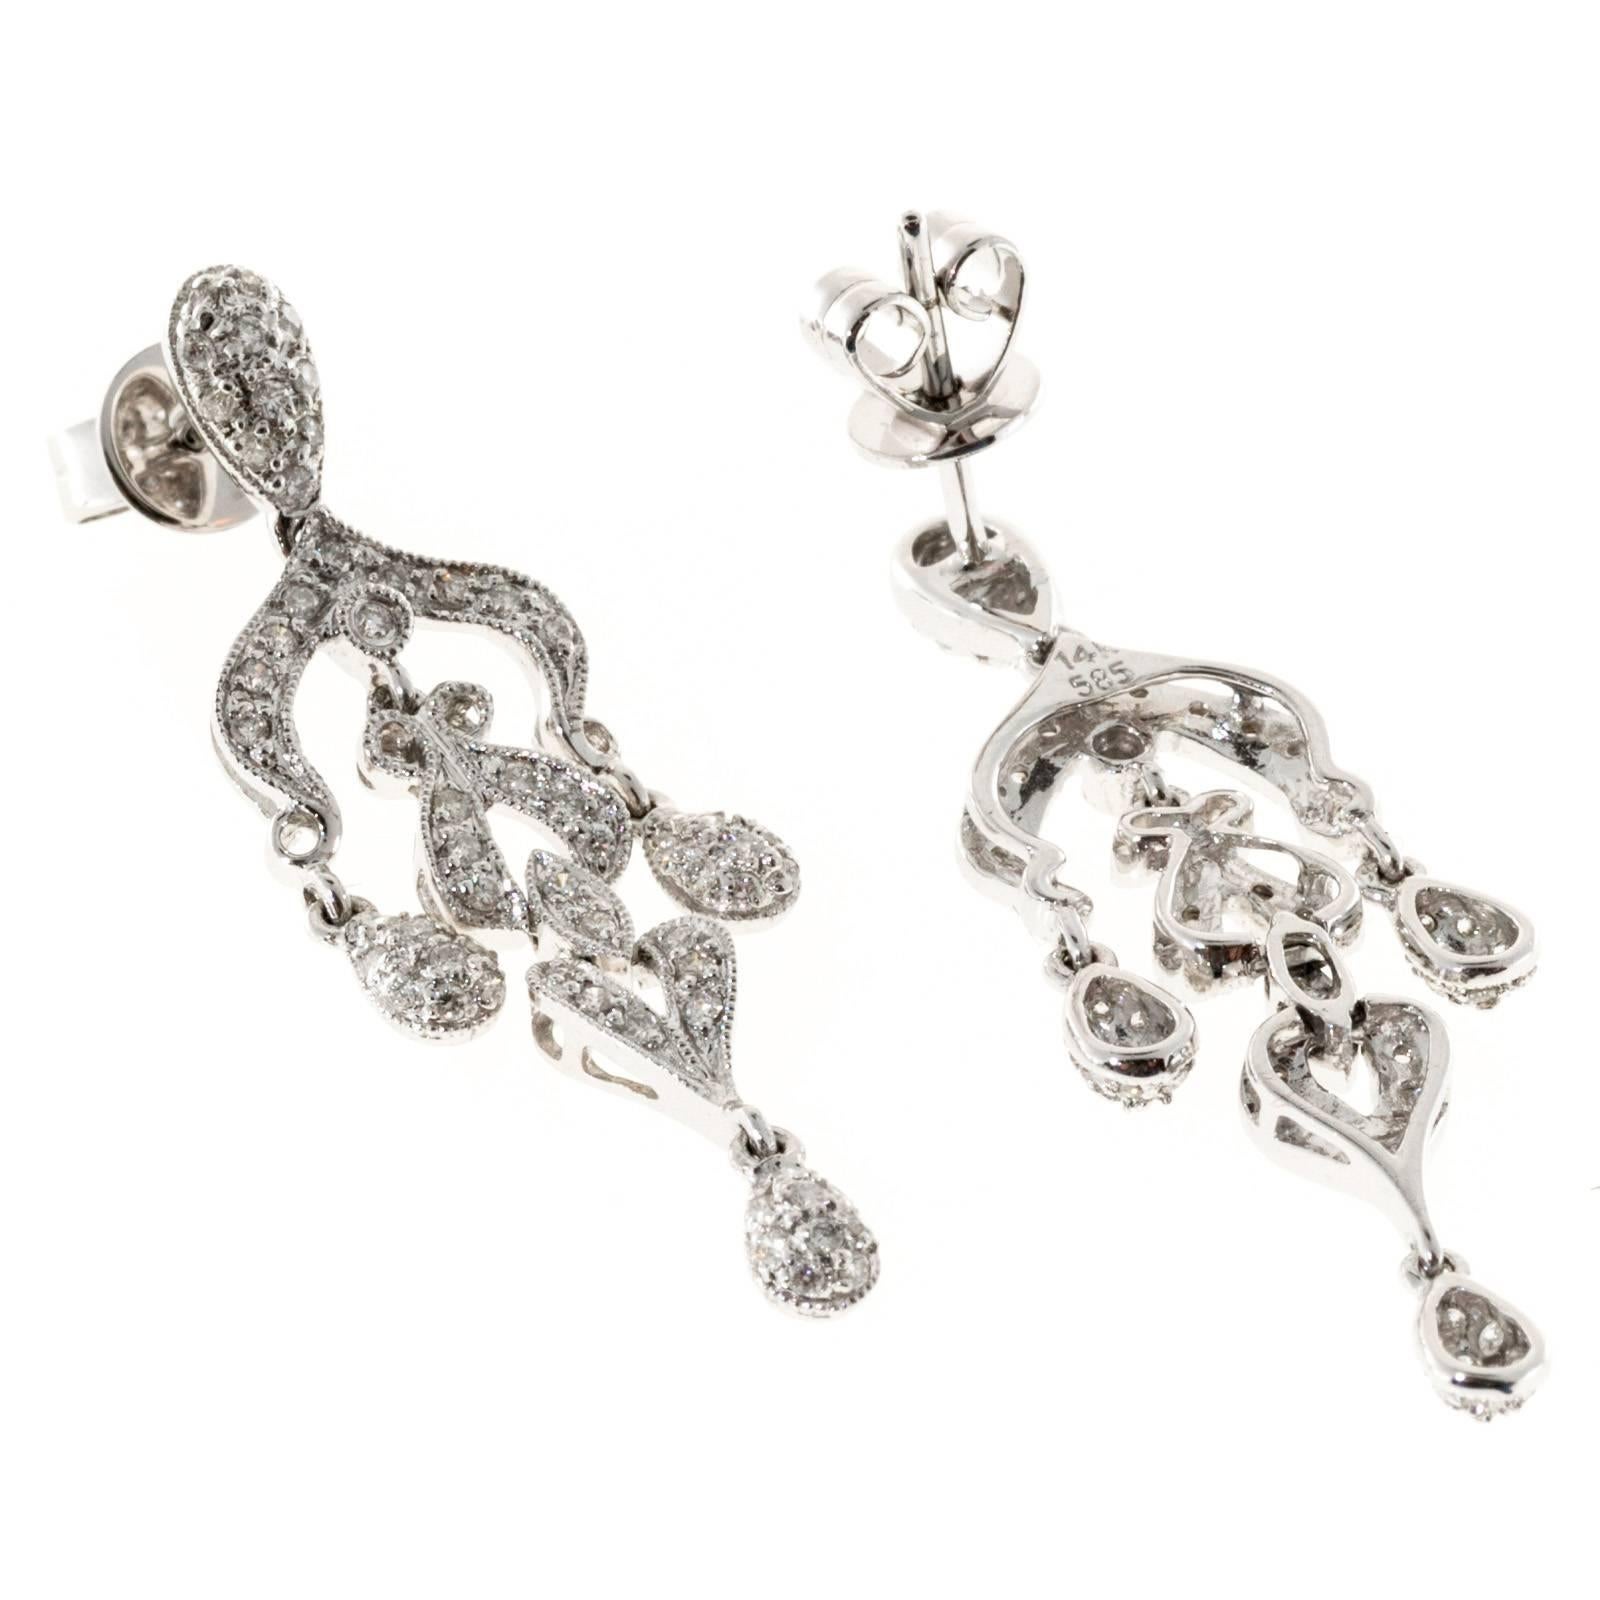 Chandelier style 14k white gold dangle earrings. 

124 round full cut diamonds, approx. total weight .75cts, H, VS – SI
14k white gold
Tested: 14k
Stamped: 14k 585
5.2 grams
Top to bottom: 38.05mm or 1.50 inches
Width: 10.92mm or .43